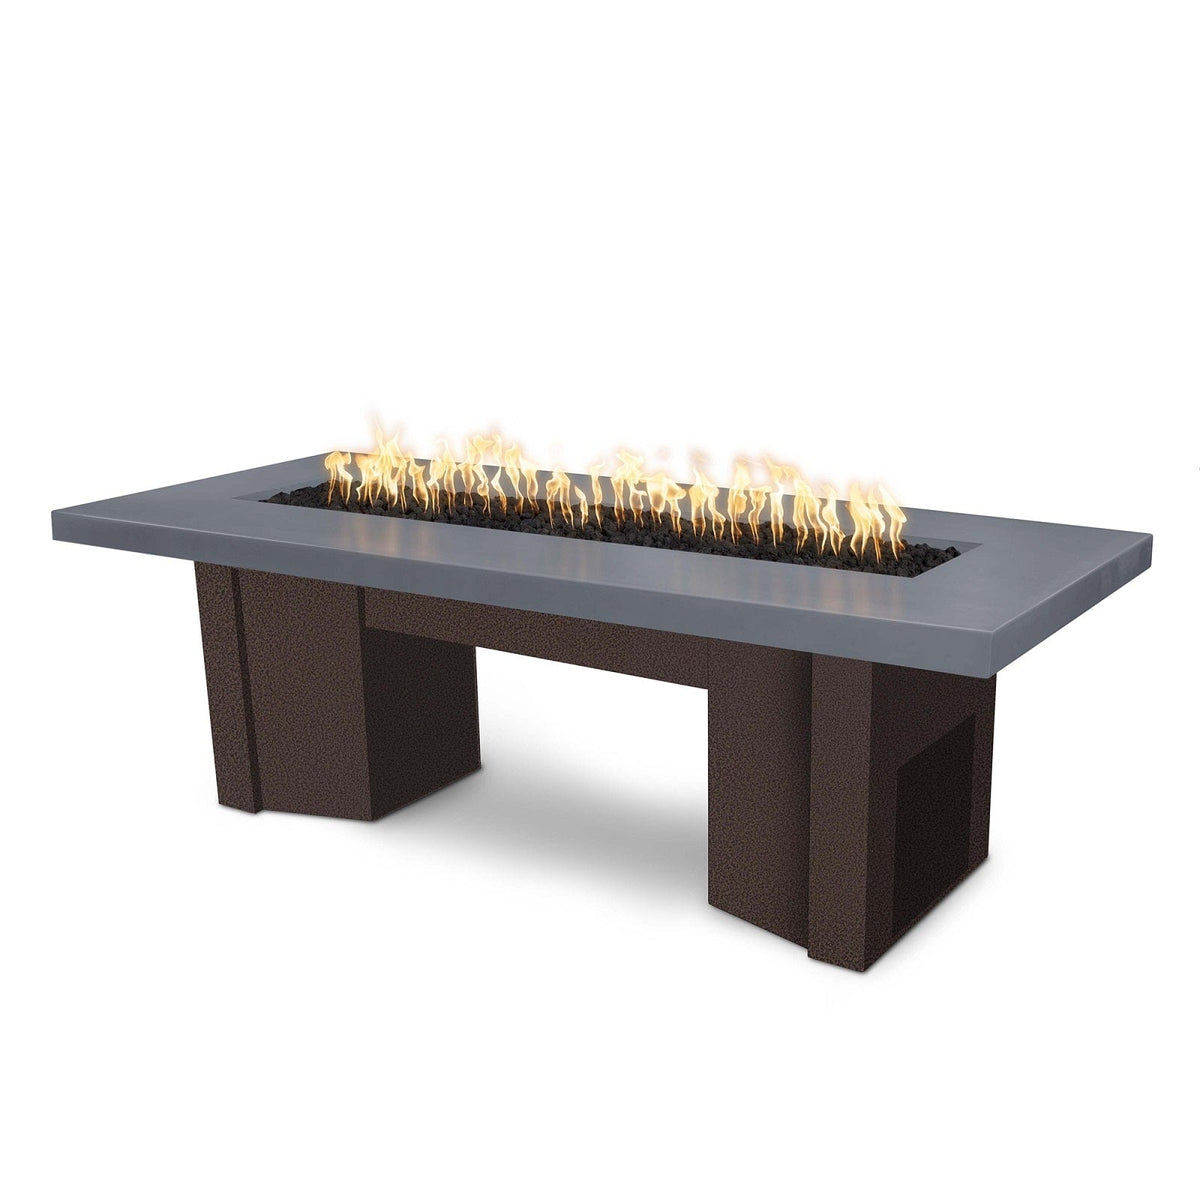 The Outdoor Plus Fire Features Gray (-GRY) / Copper Vein Powder Coated Steel (-CPV) The Outdoor Plus 78&quot; Alameda Fire Table Smooth Concrete in Natural Gas - Match Lit with Flame Sense System / OPT-ALMGFRC78FSML-NG